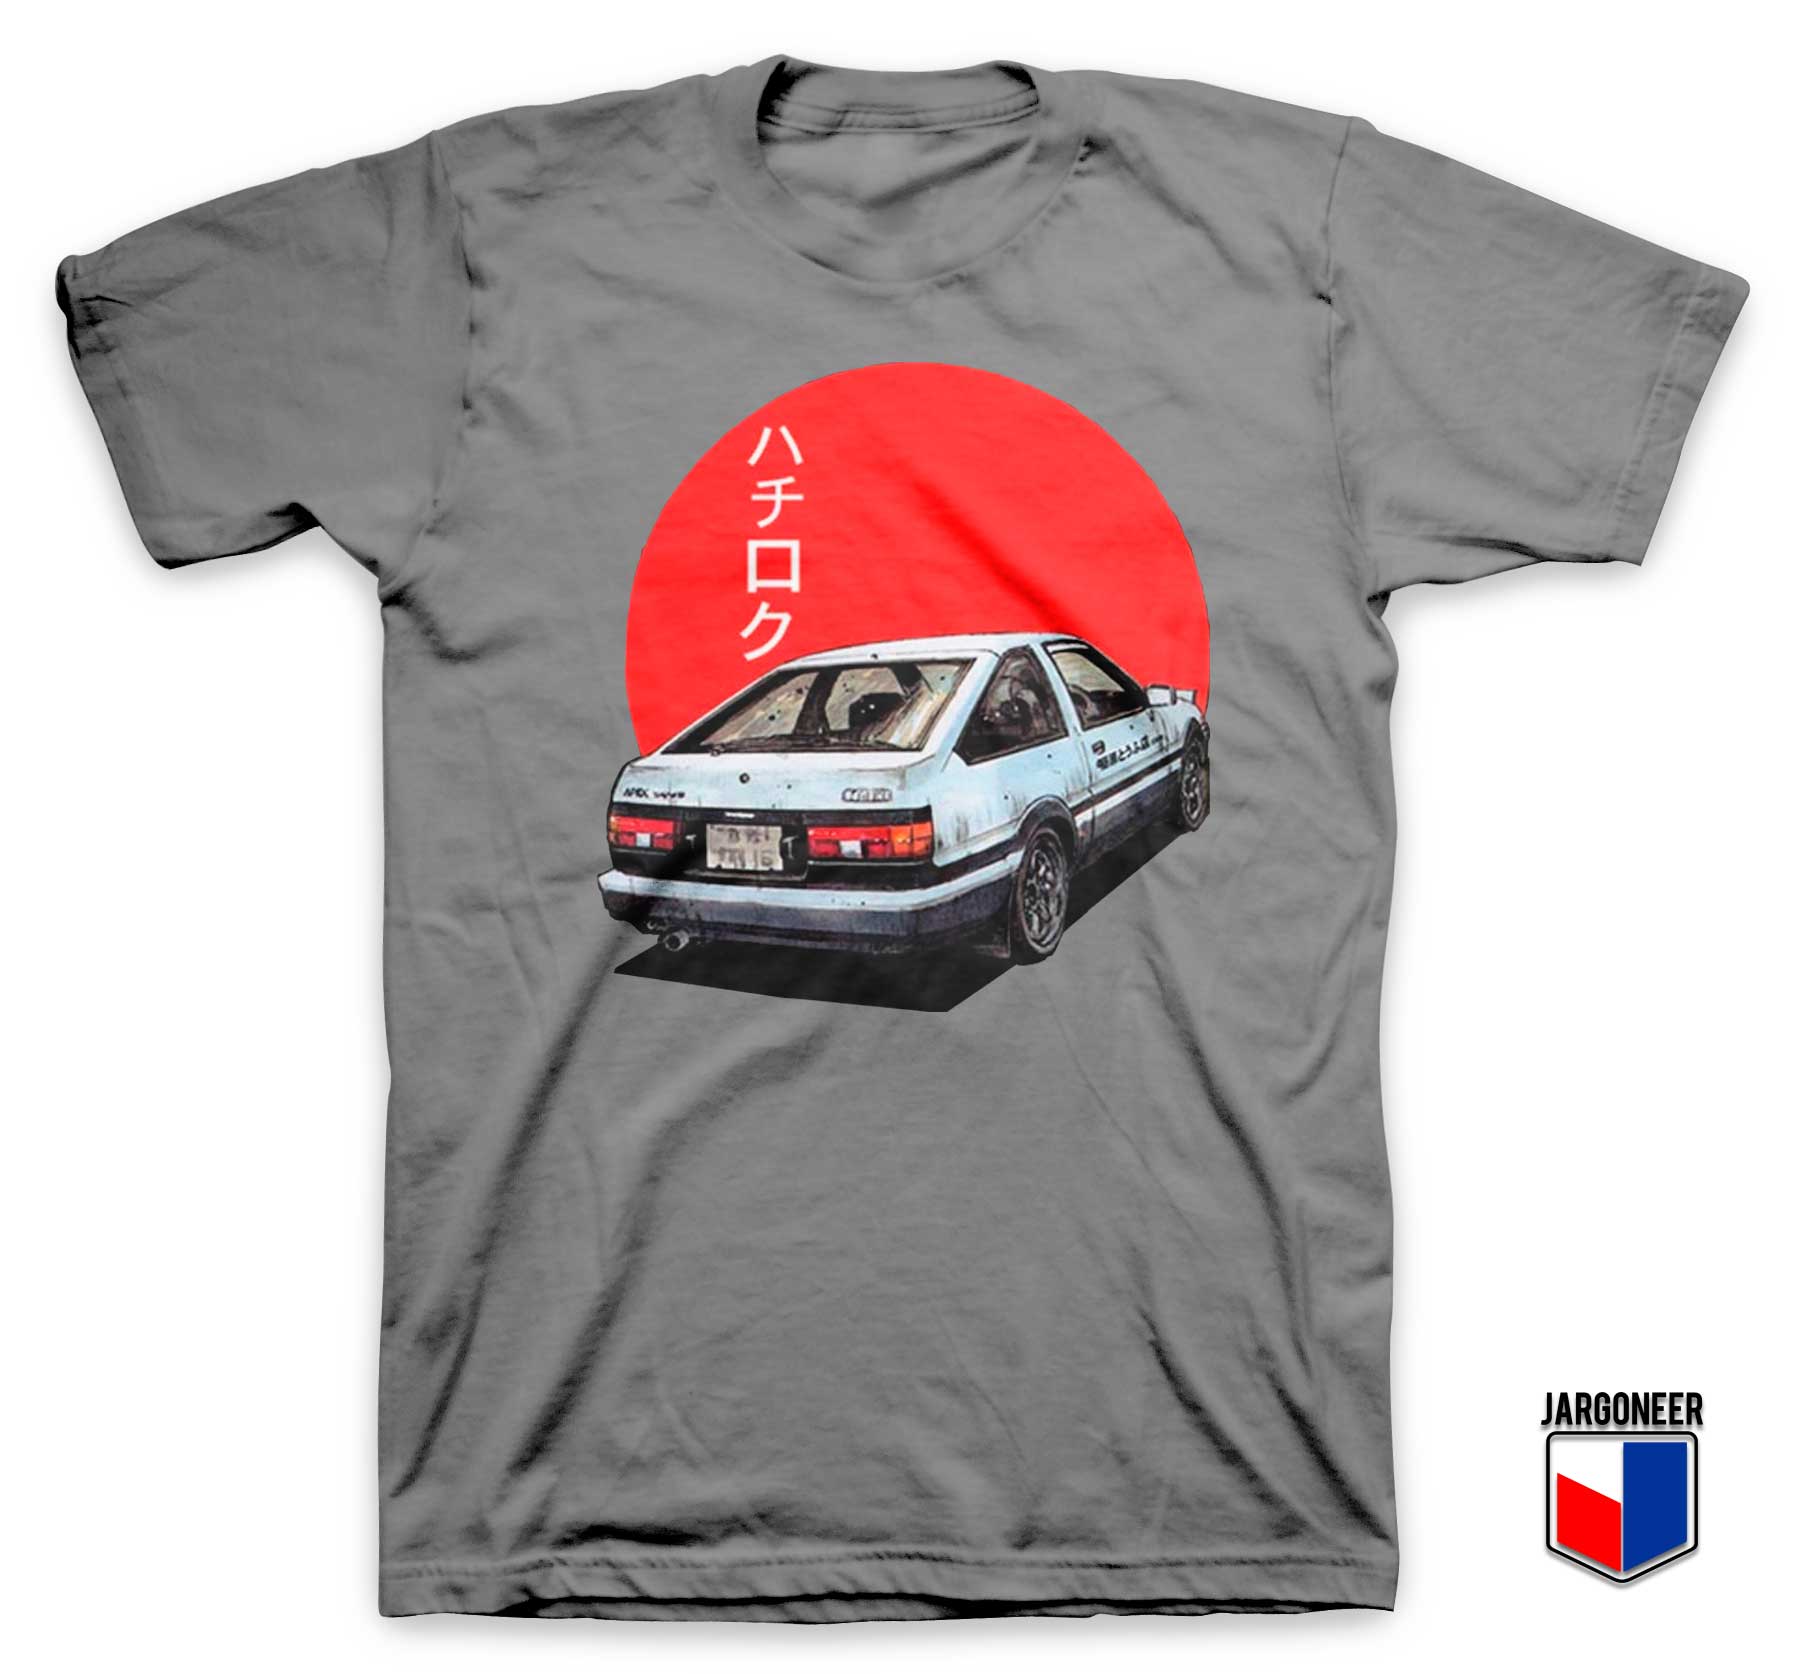 Buy Now Ae86 D Trueno Japan T Shirt with Unique Graphic